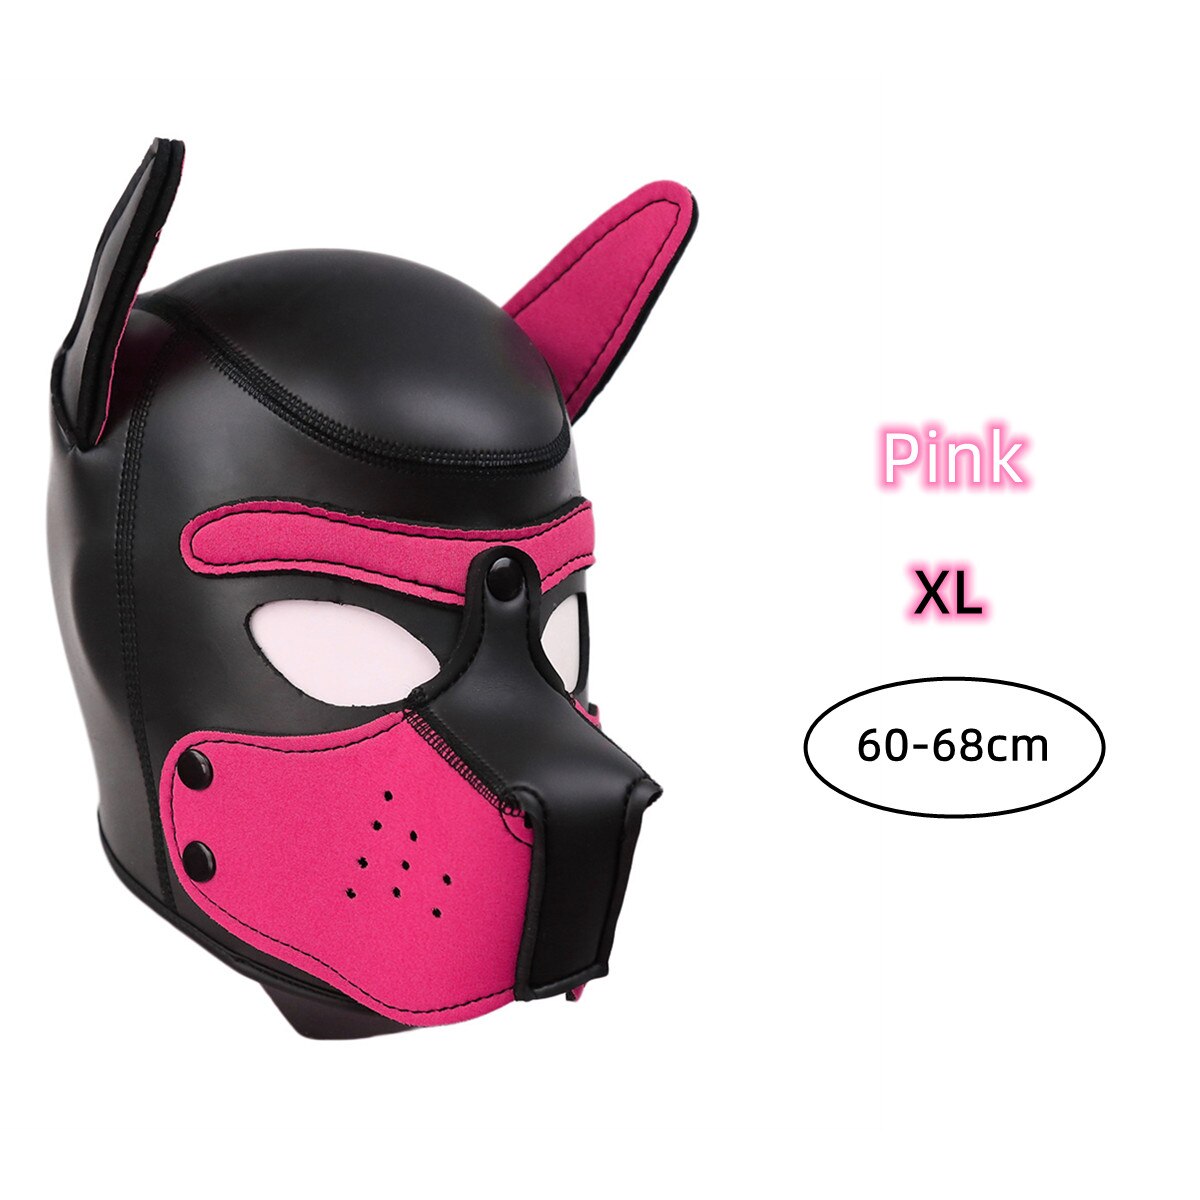 XL Code Brand New Increase Large Size Puppy Cosplay Padded Rubber Full Head Hood Mask with Ears for Men Women Dog Role Play